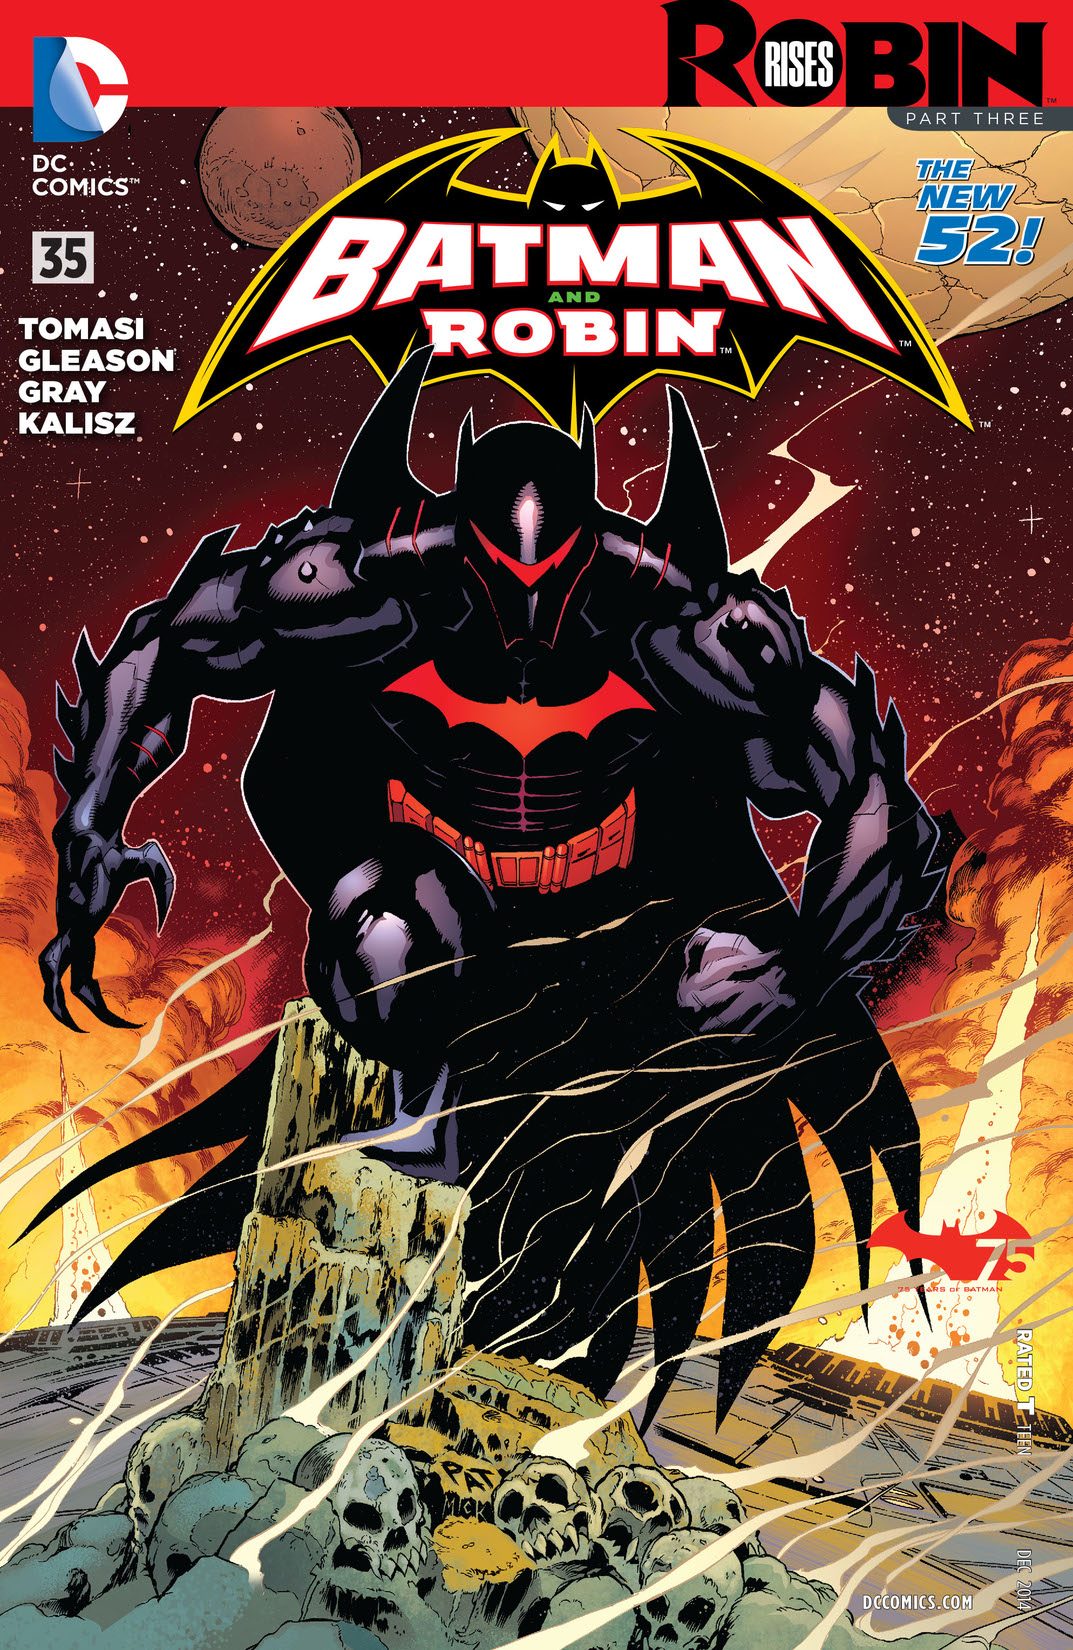 Batman and Robin (2011-) #35 preview images